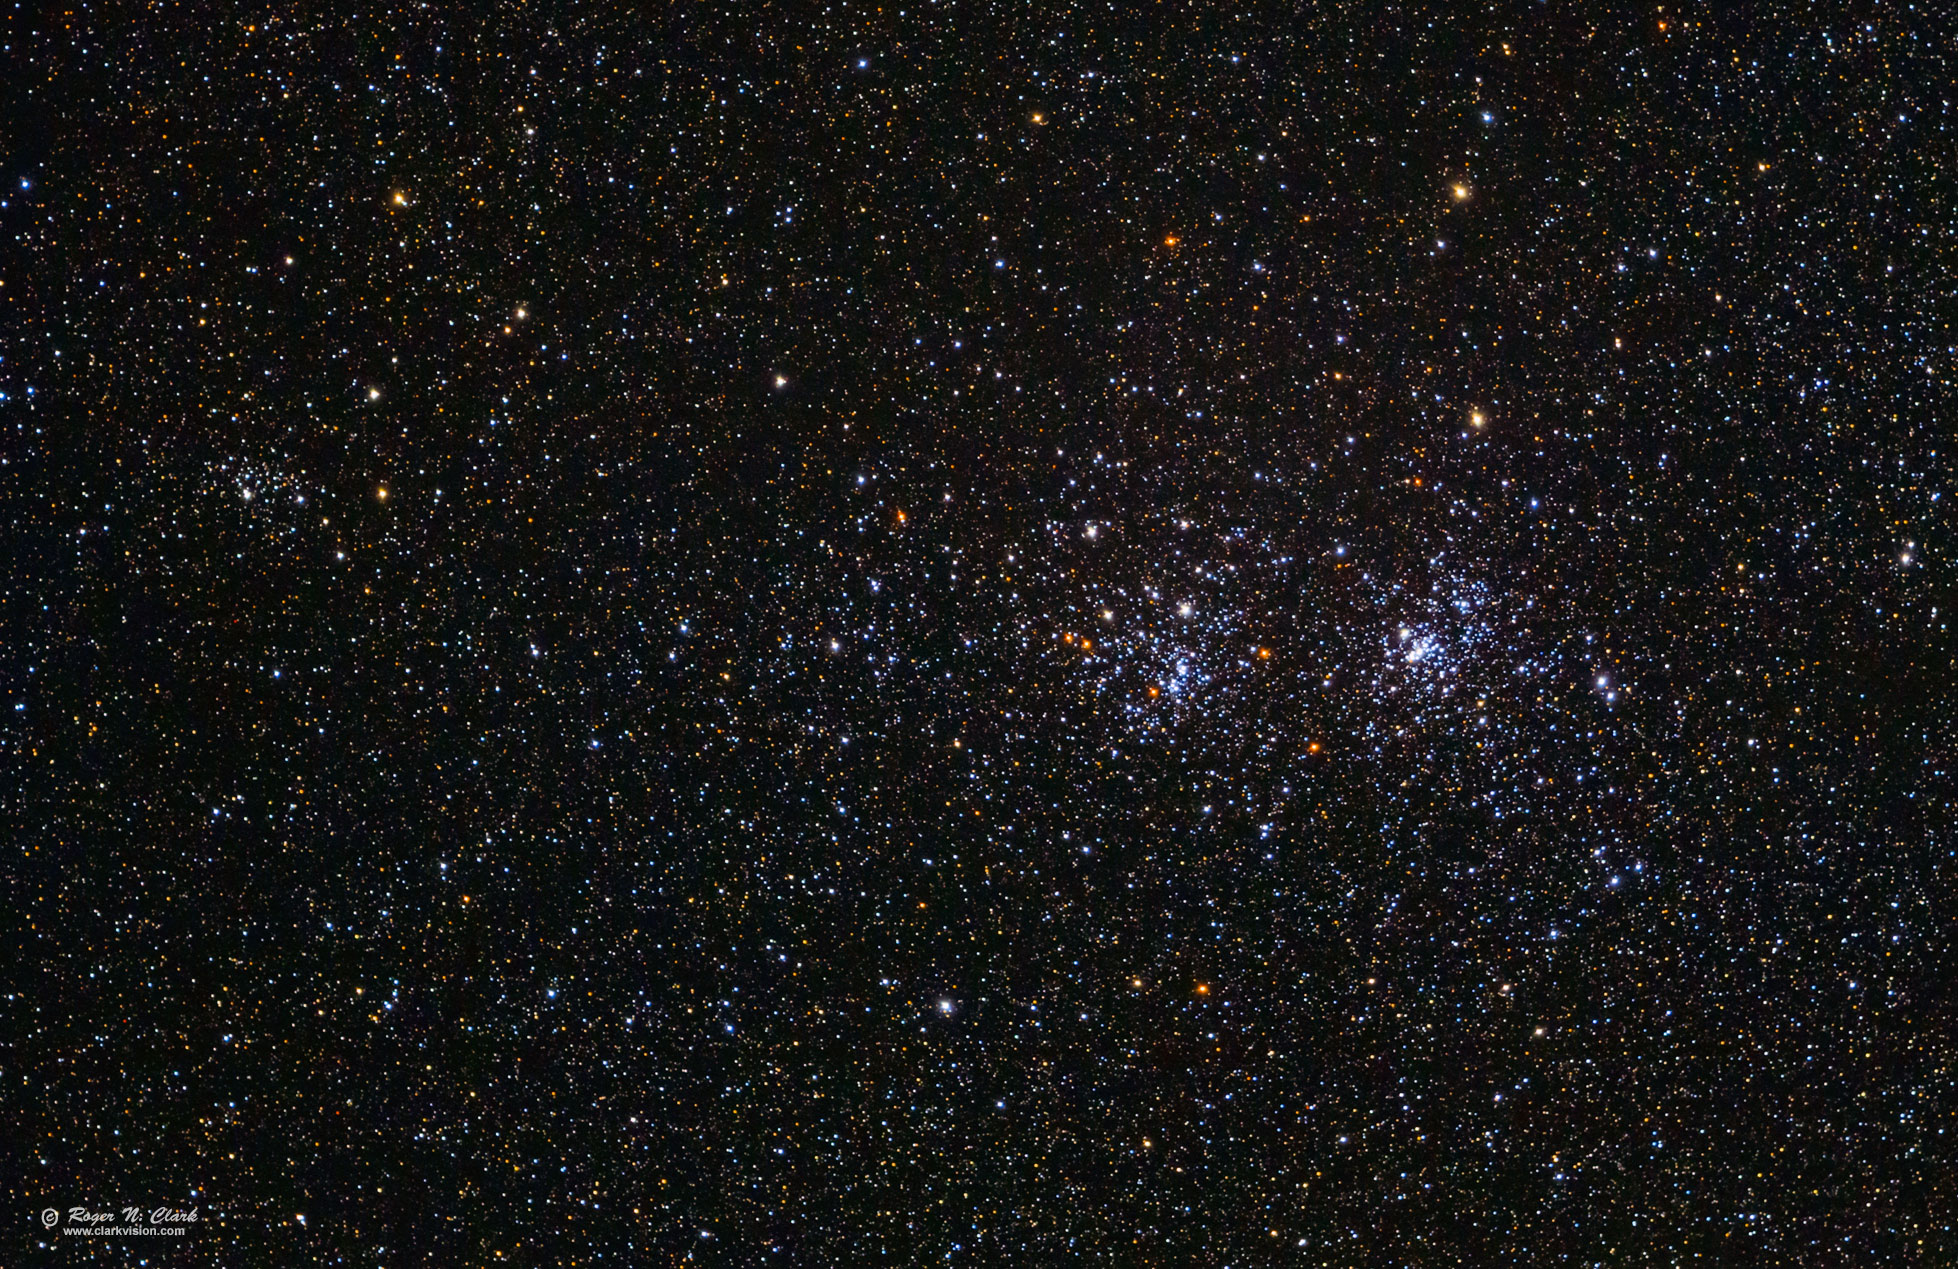 image double-cluster.300mm-7d1c09.26.2014.IMG_2401-11.d0.5xc1s.jpg is Copyrighted by Roger N. Clark, www.clarkvision.com